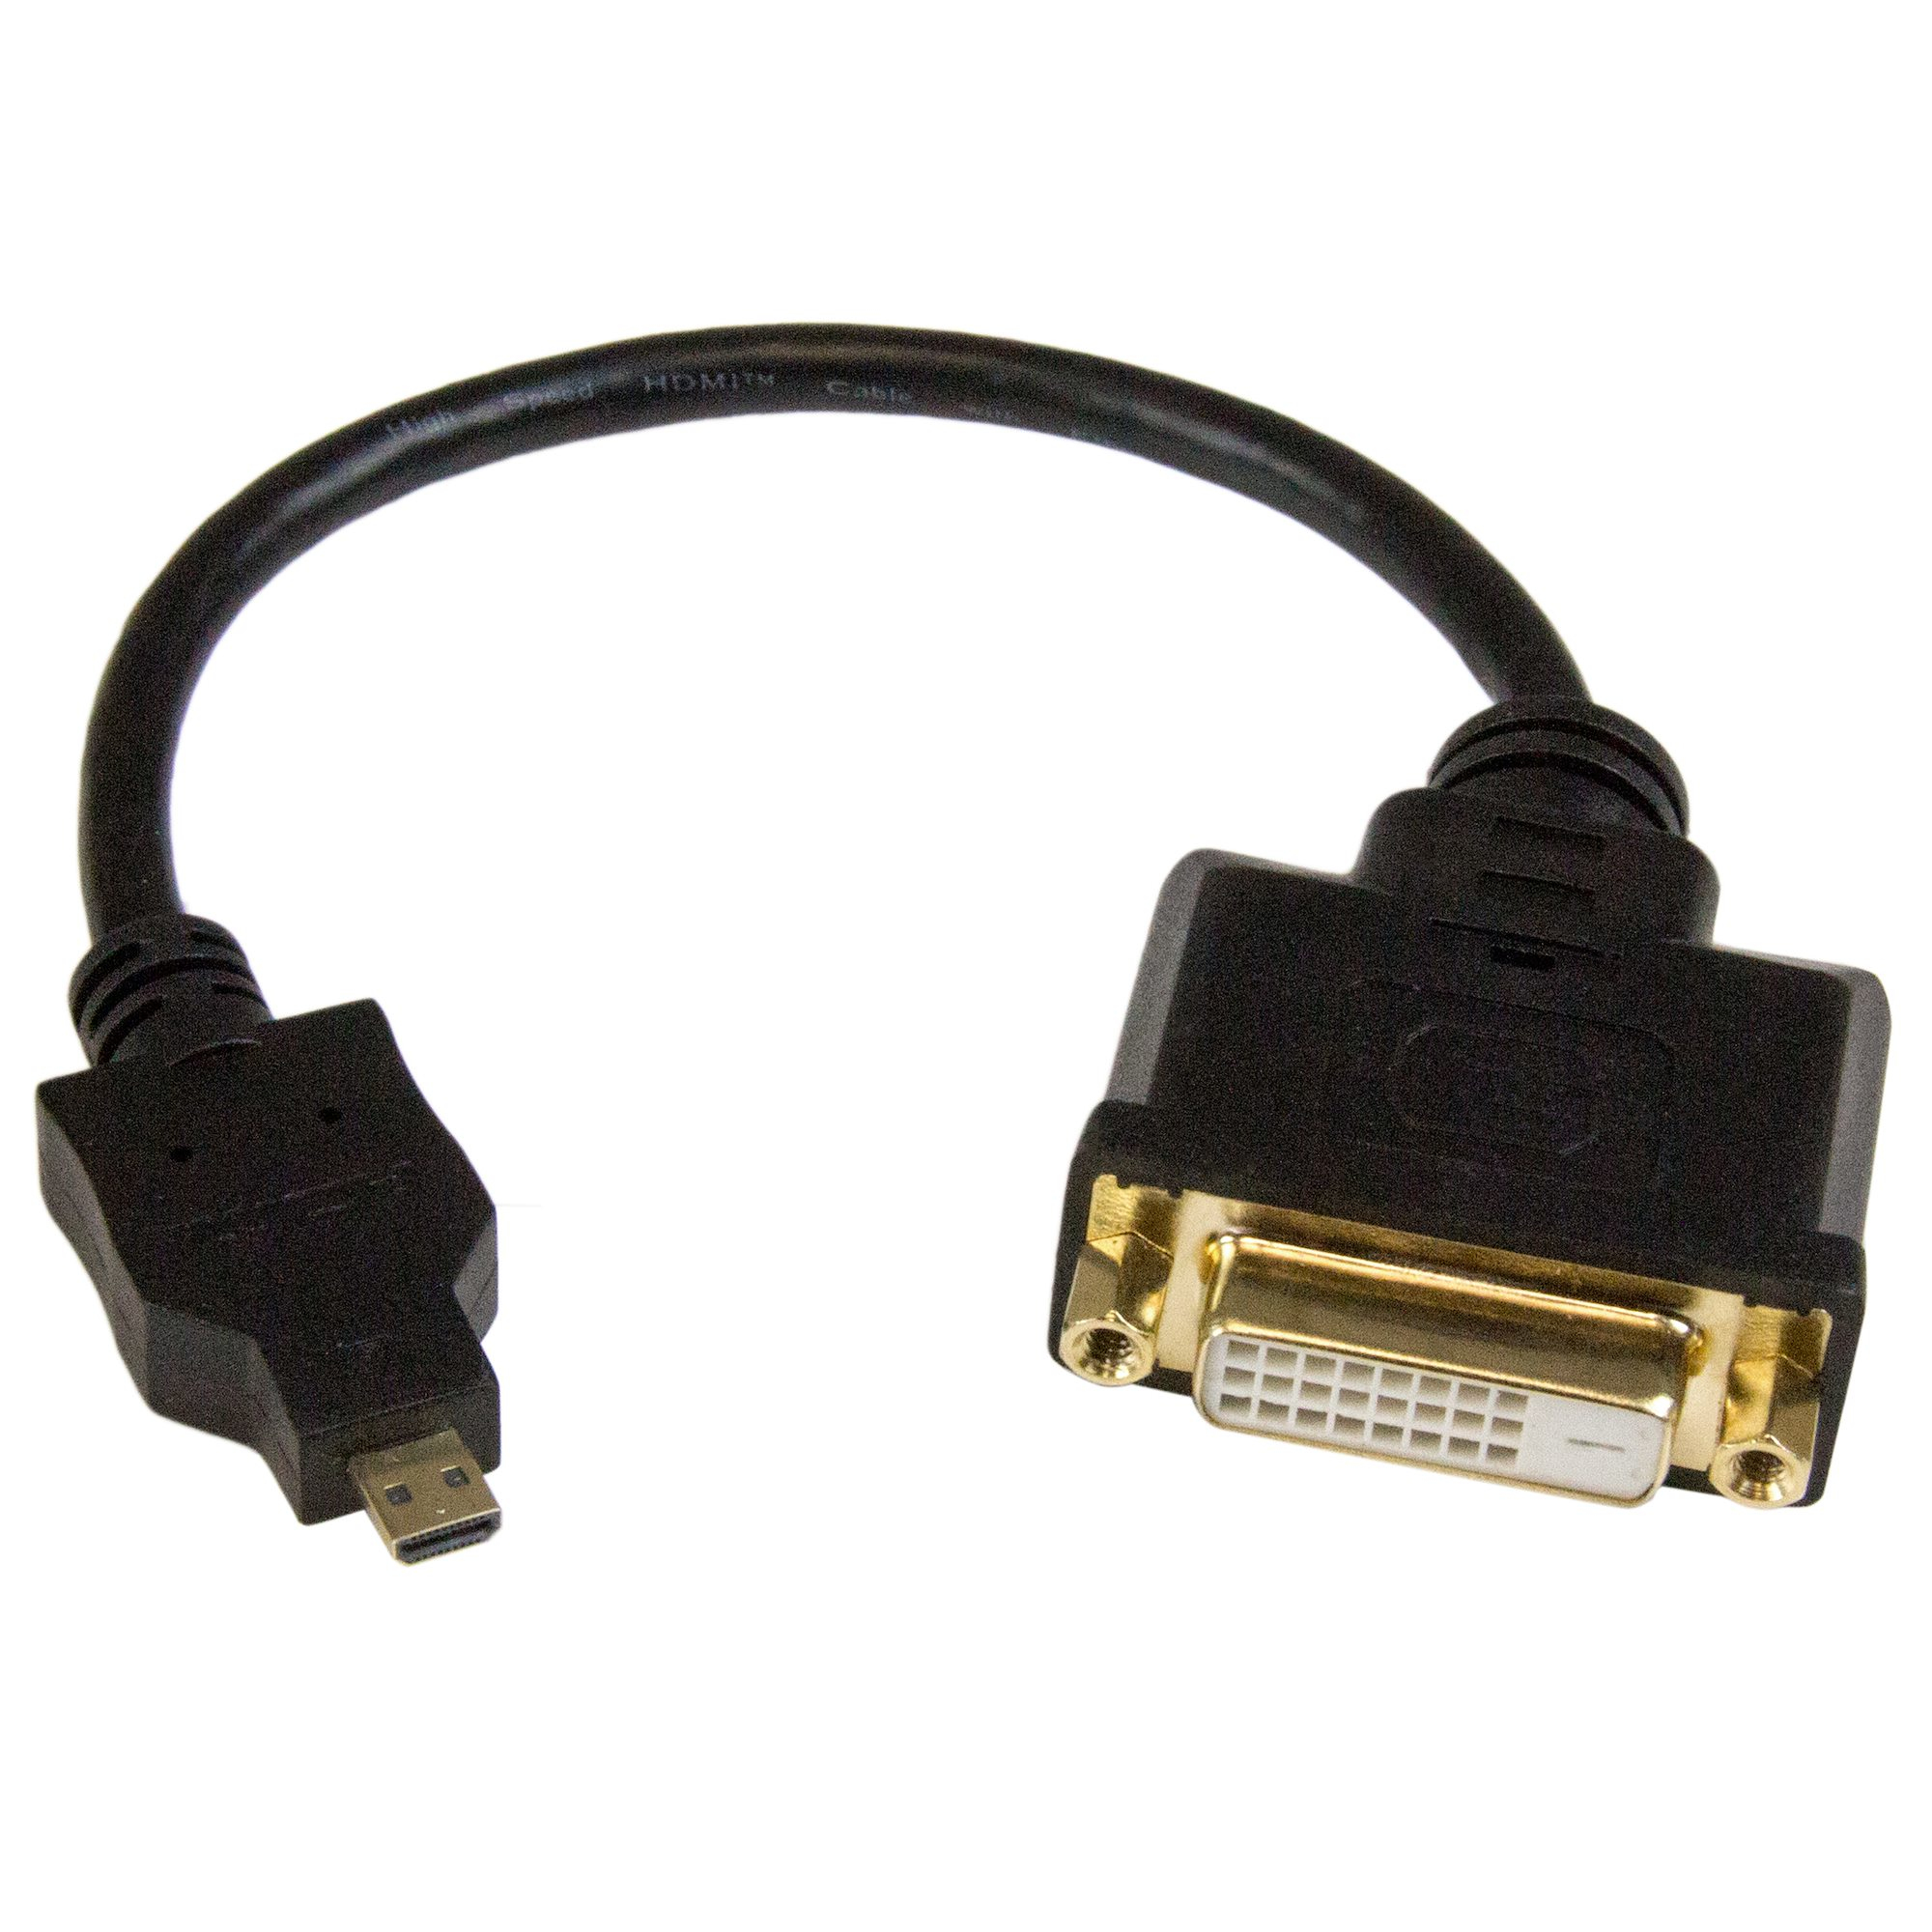 StarTech.com 8in Micro HDMI to DVI-D Adapter M/F - 8in Micro HDMI to DVI Cable - Connect a Micro HDMI phone or laptop to a DVI-D display (HDDDVIMF8IN)